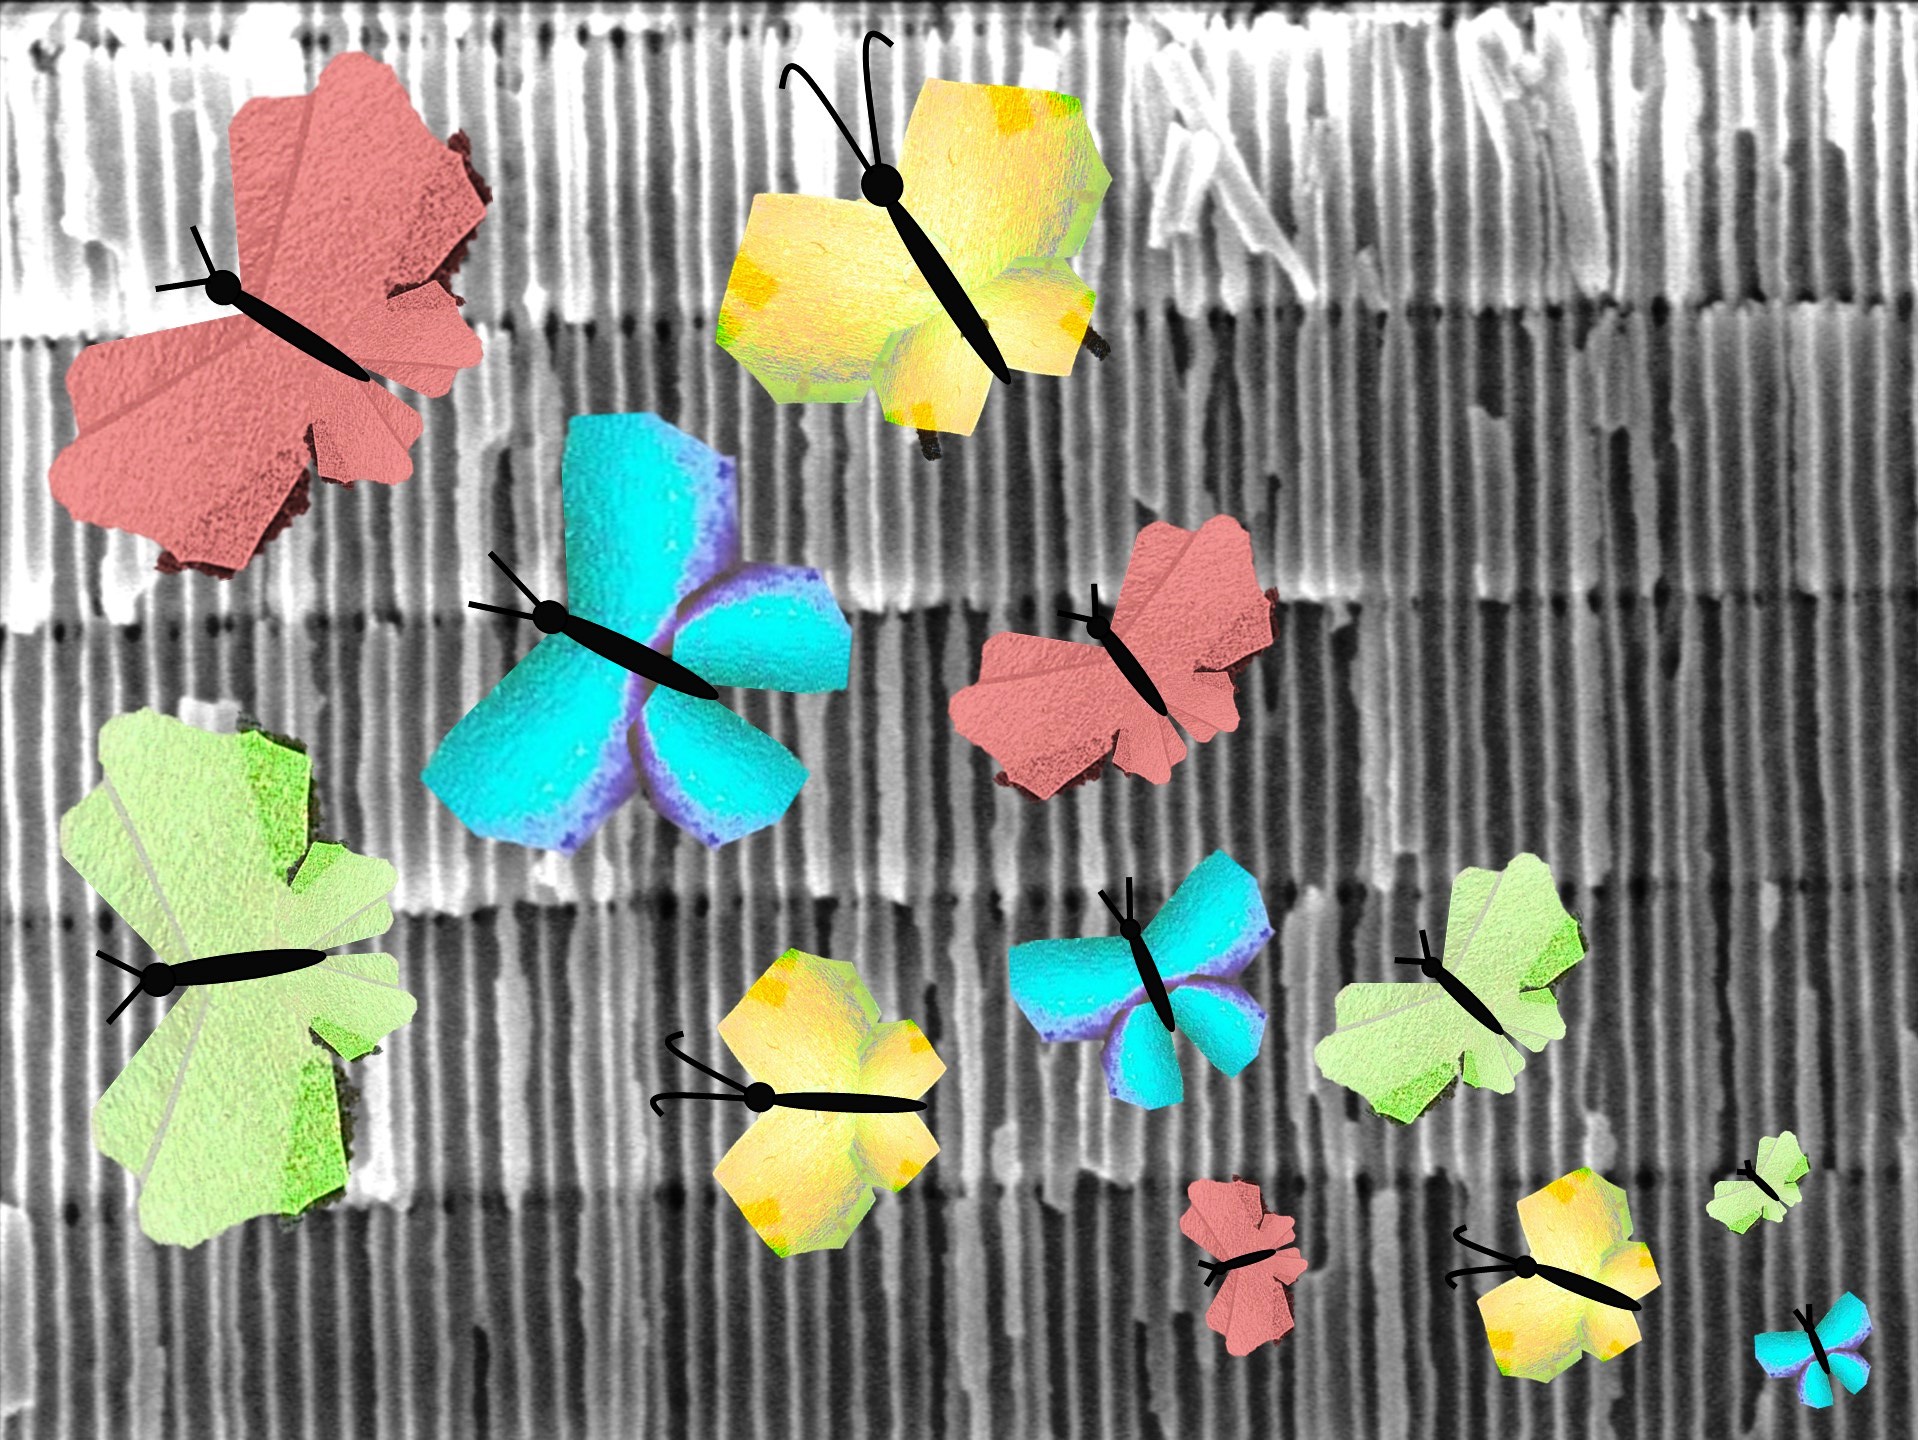 Intricate meso-scale internal structure of the all-dielectric porous metamaterials enables structural color formation akin to that displayed by colorful butterfly wings